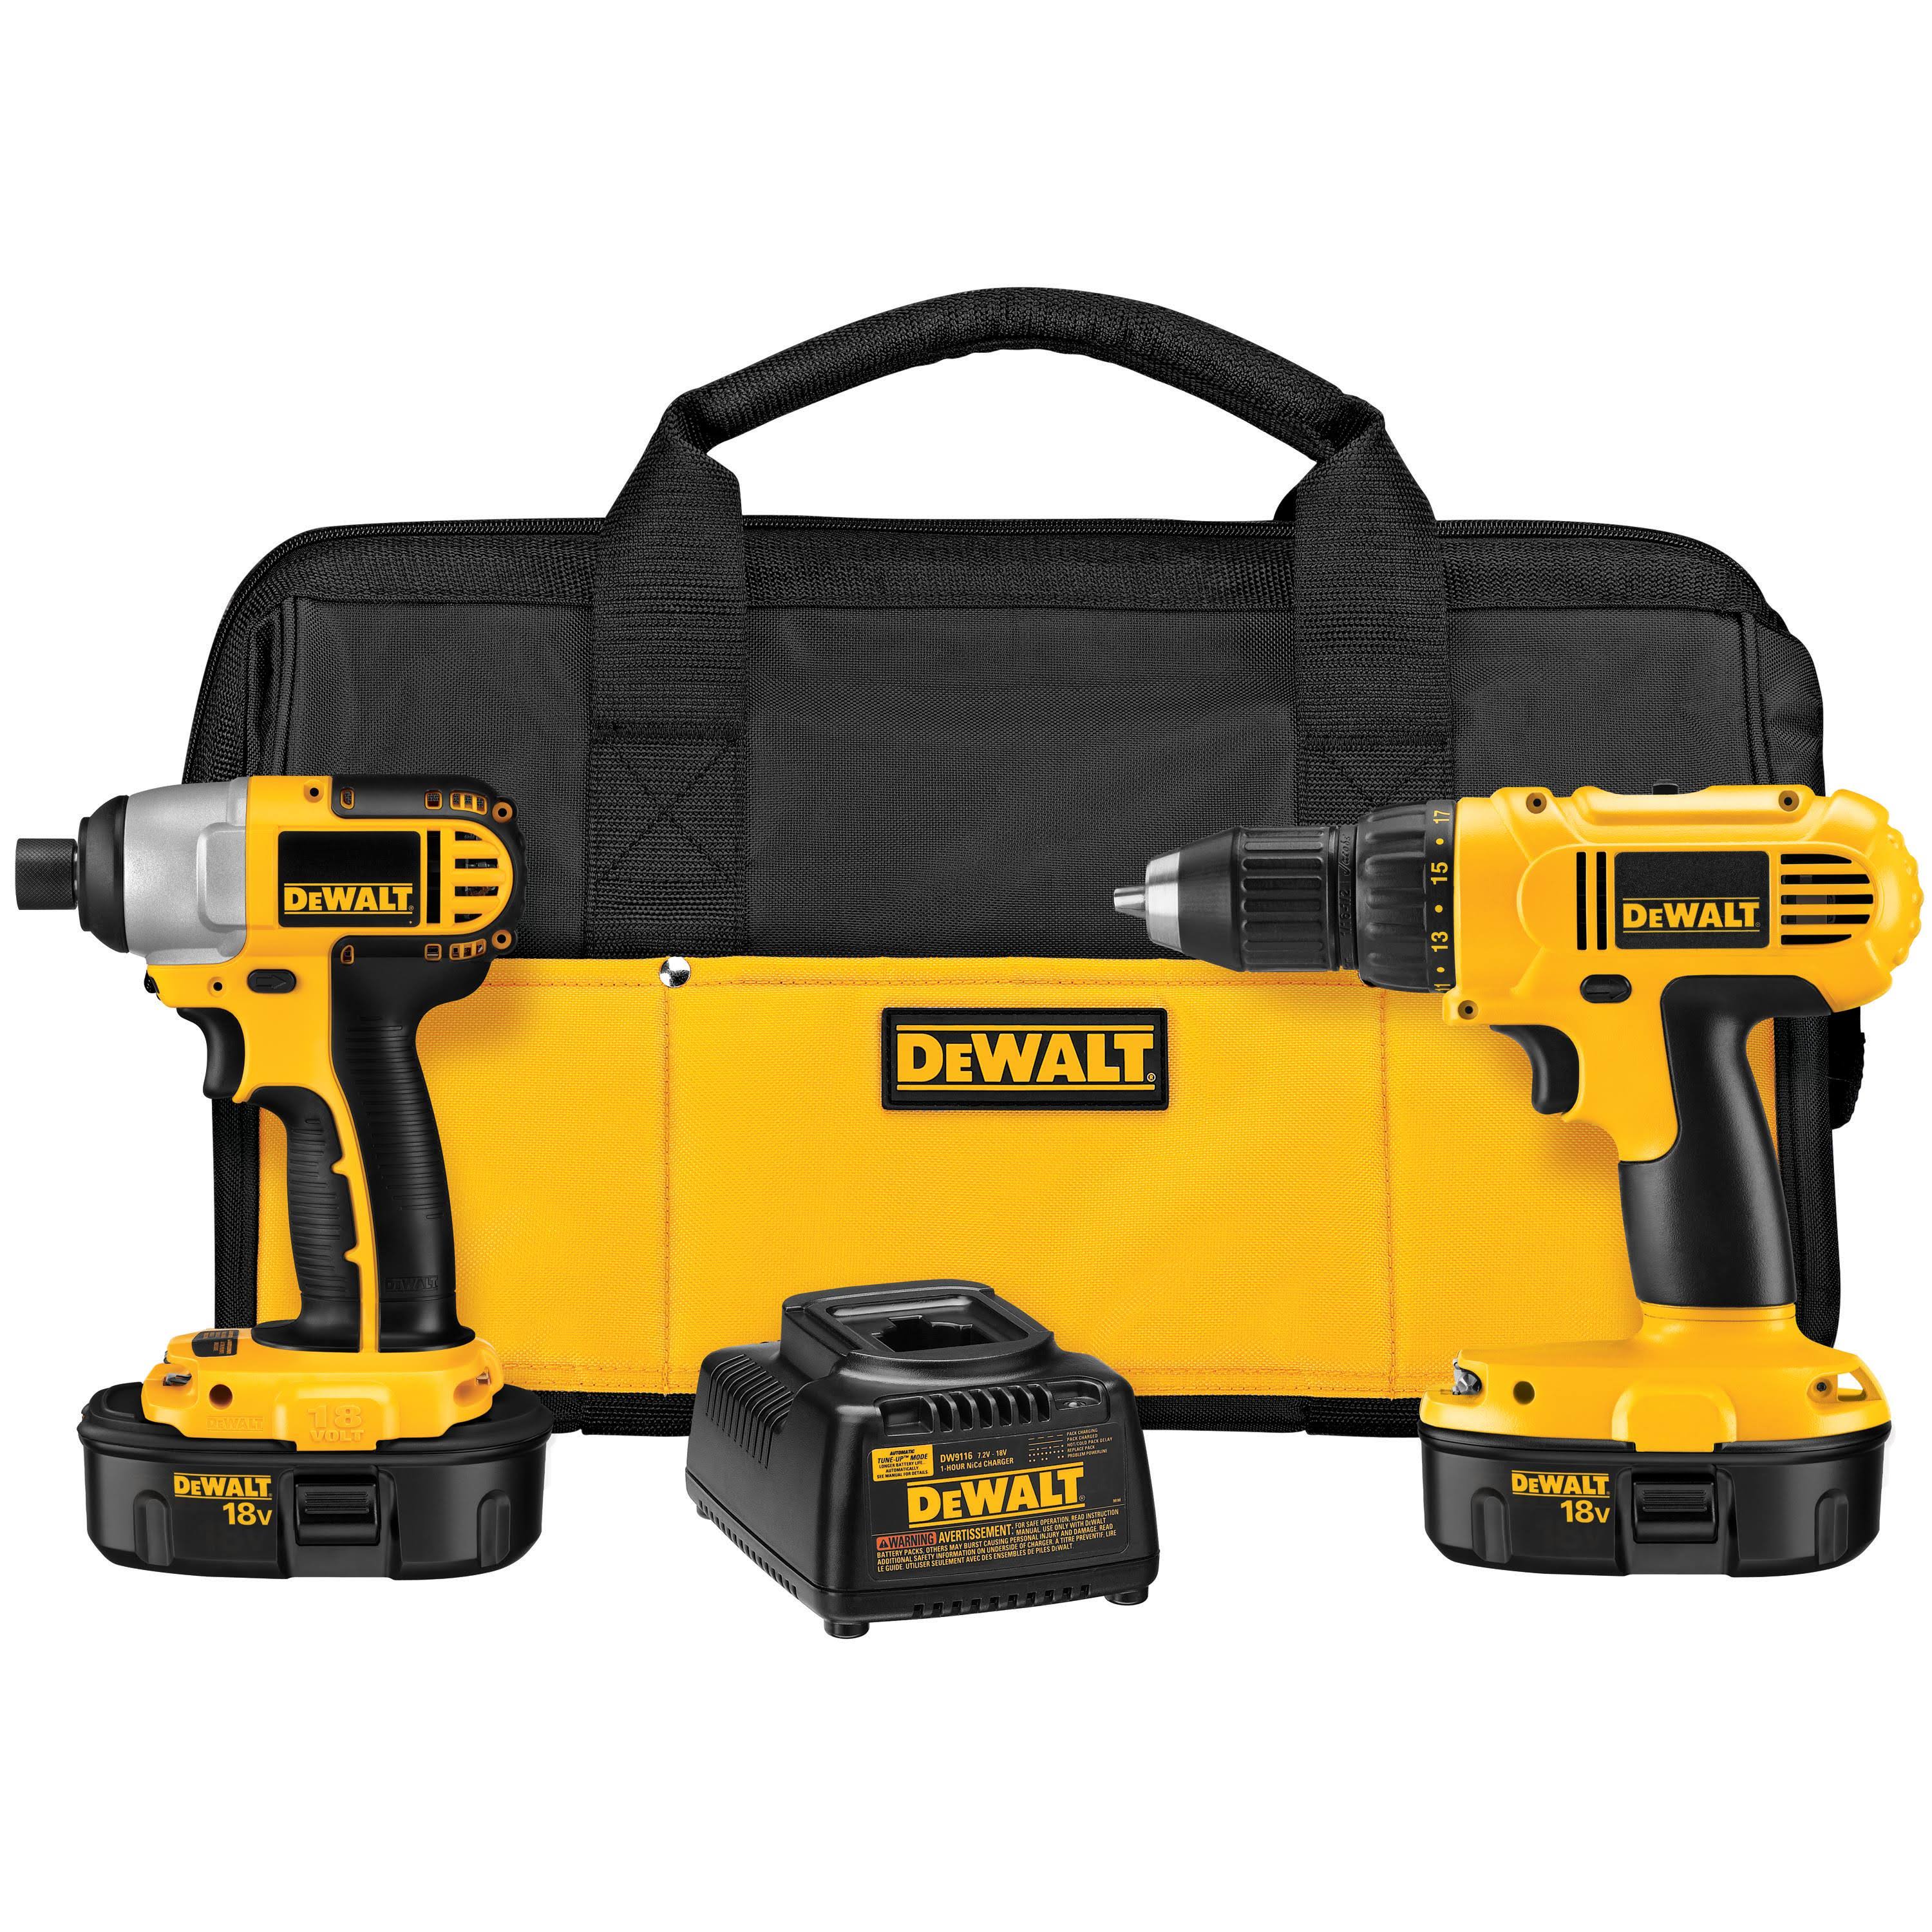 Dewalt Cordless Compact Drill Driver and Impact Driver Combo Kit - 18V